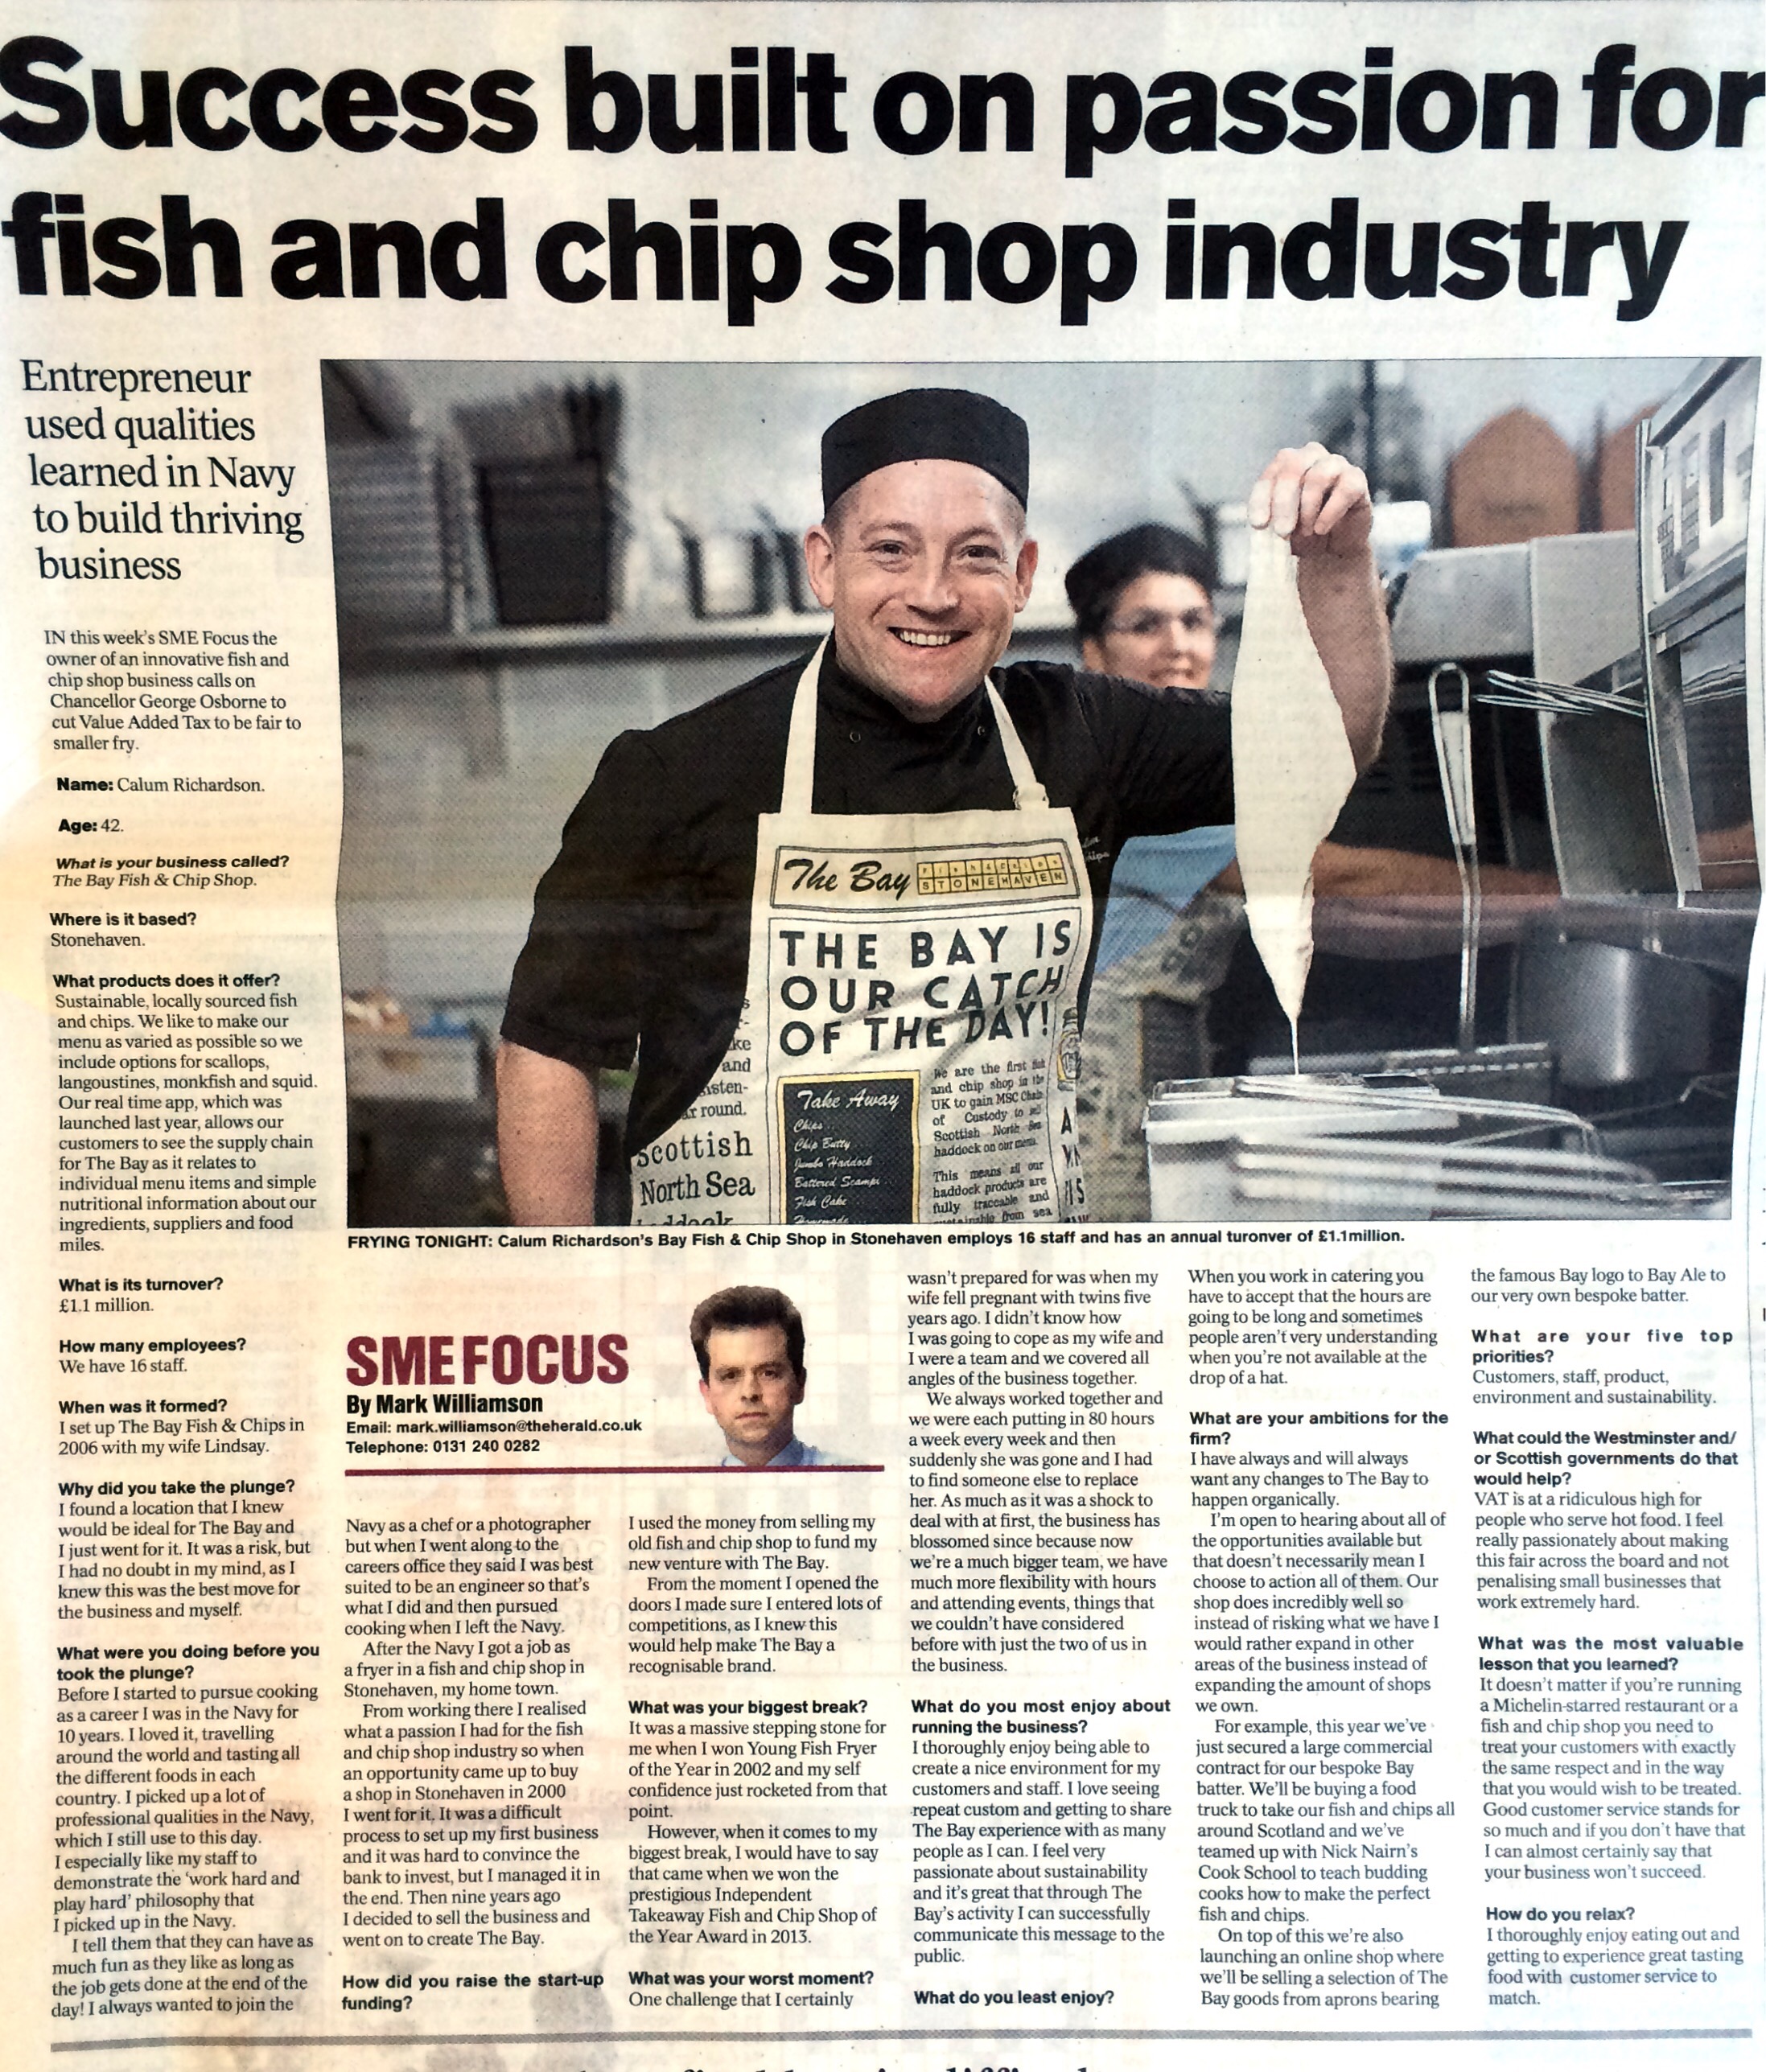 Success built on passion for fish and chip shop industry